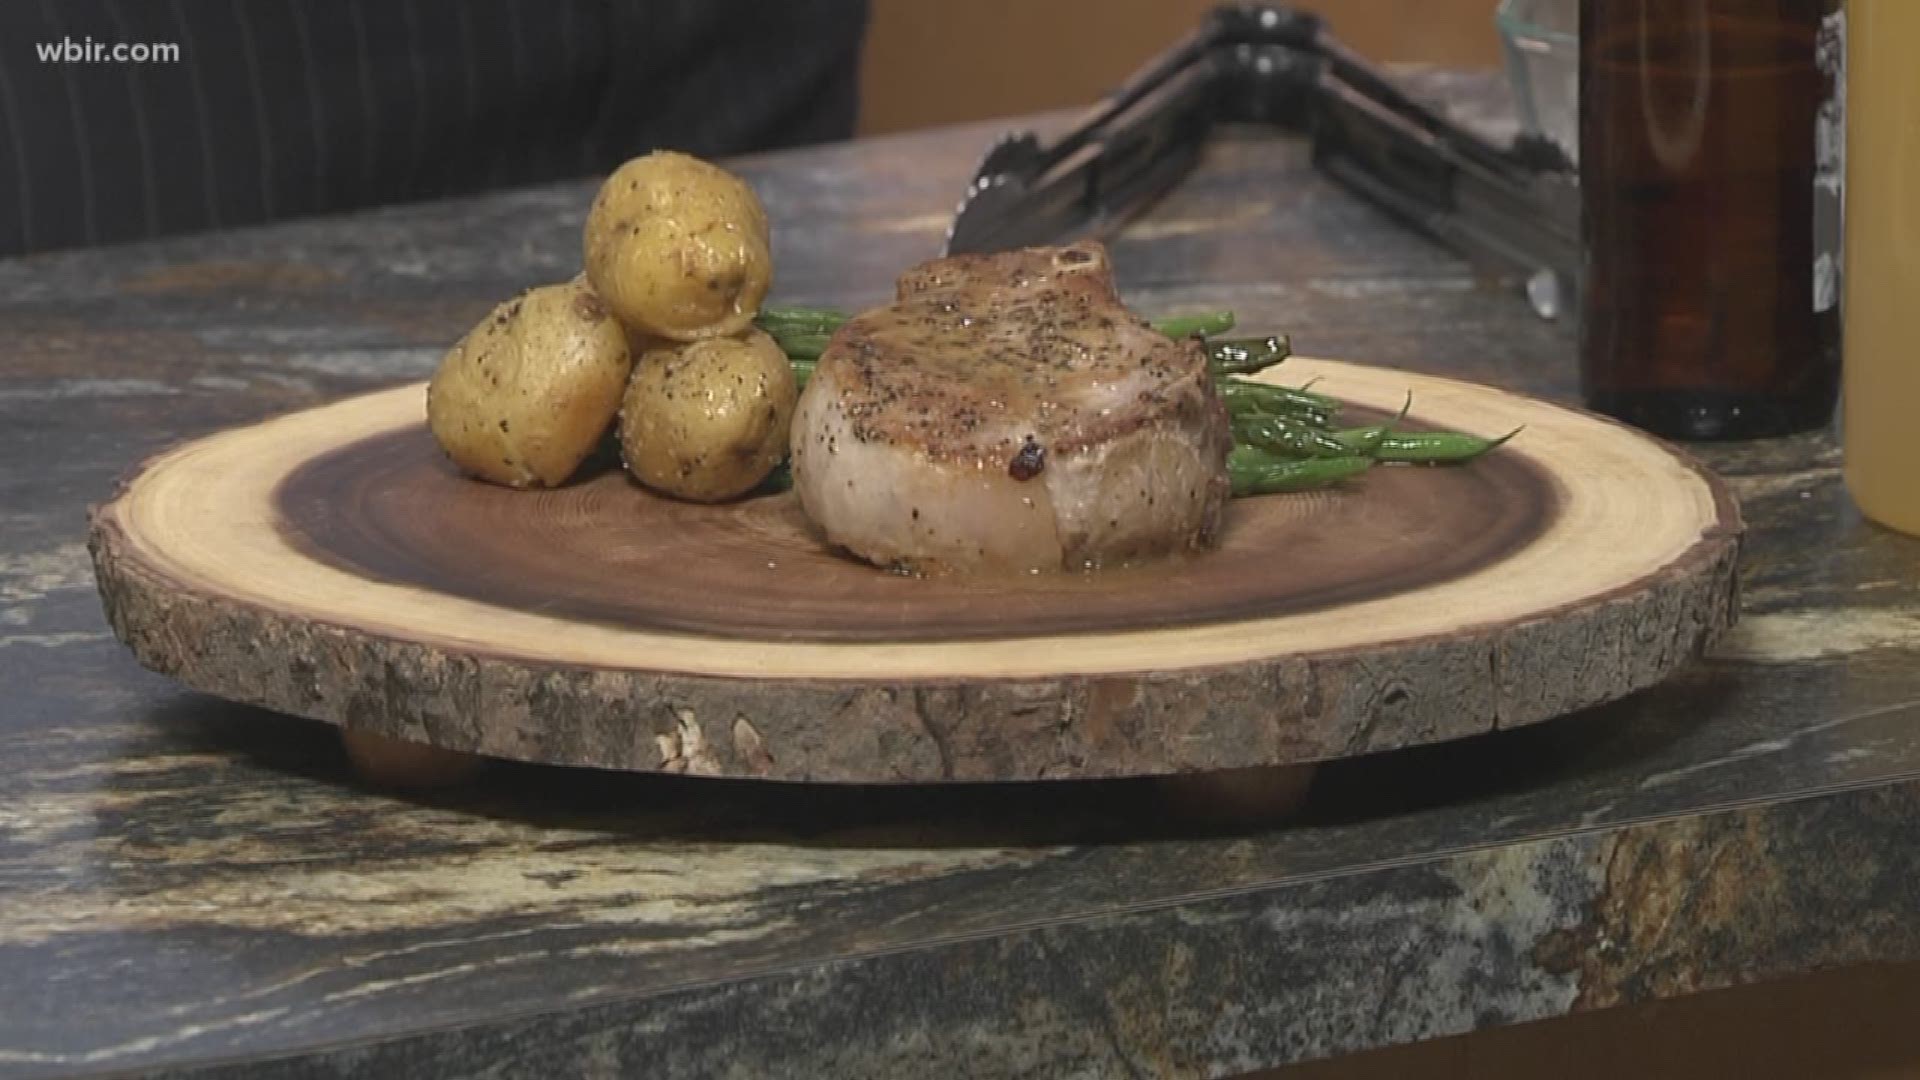 Chef Jonathan Frye from the Knoxville Convention Center makes a skillet braised pork chop.